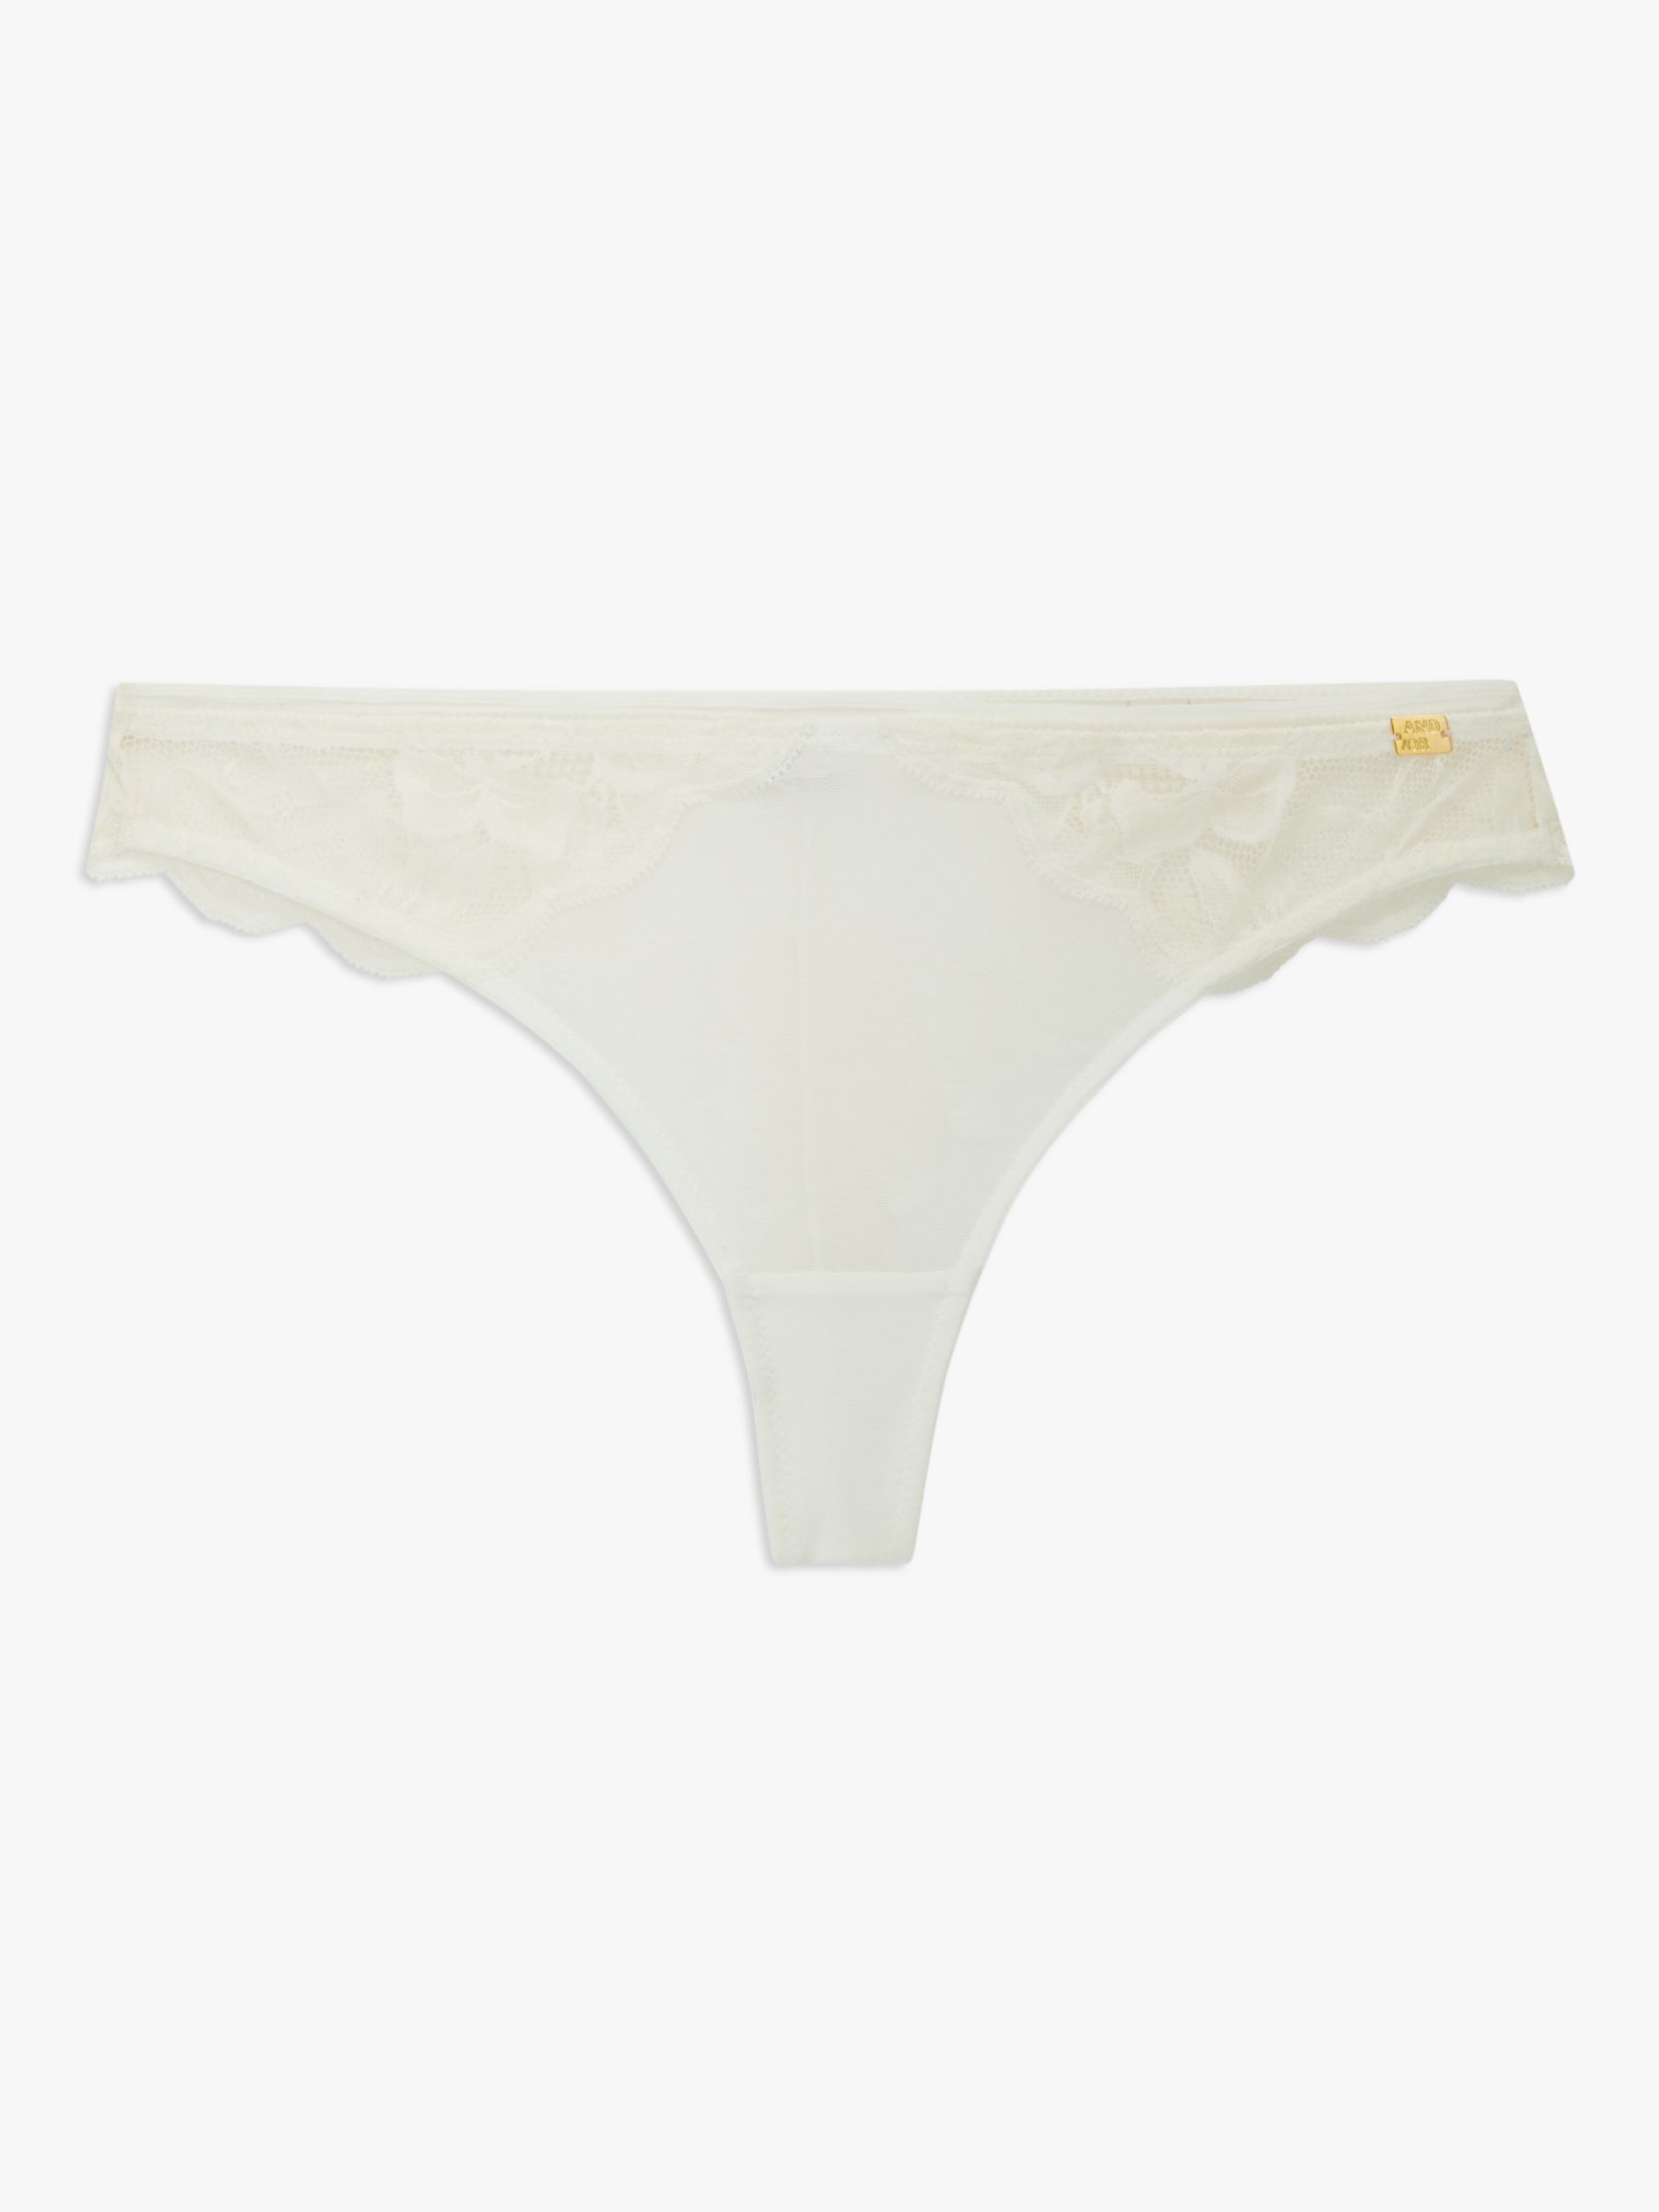 AND/OR Wren Lace Brazilian Knickers, Ivory at John Lewis & Partners